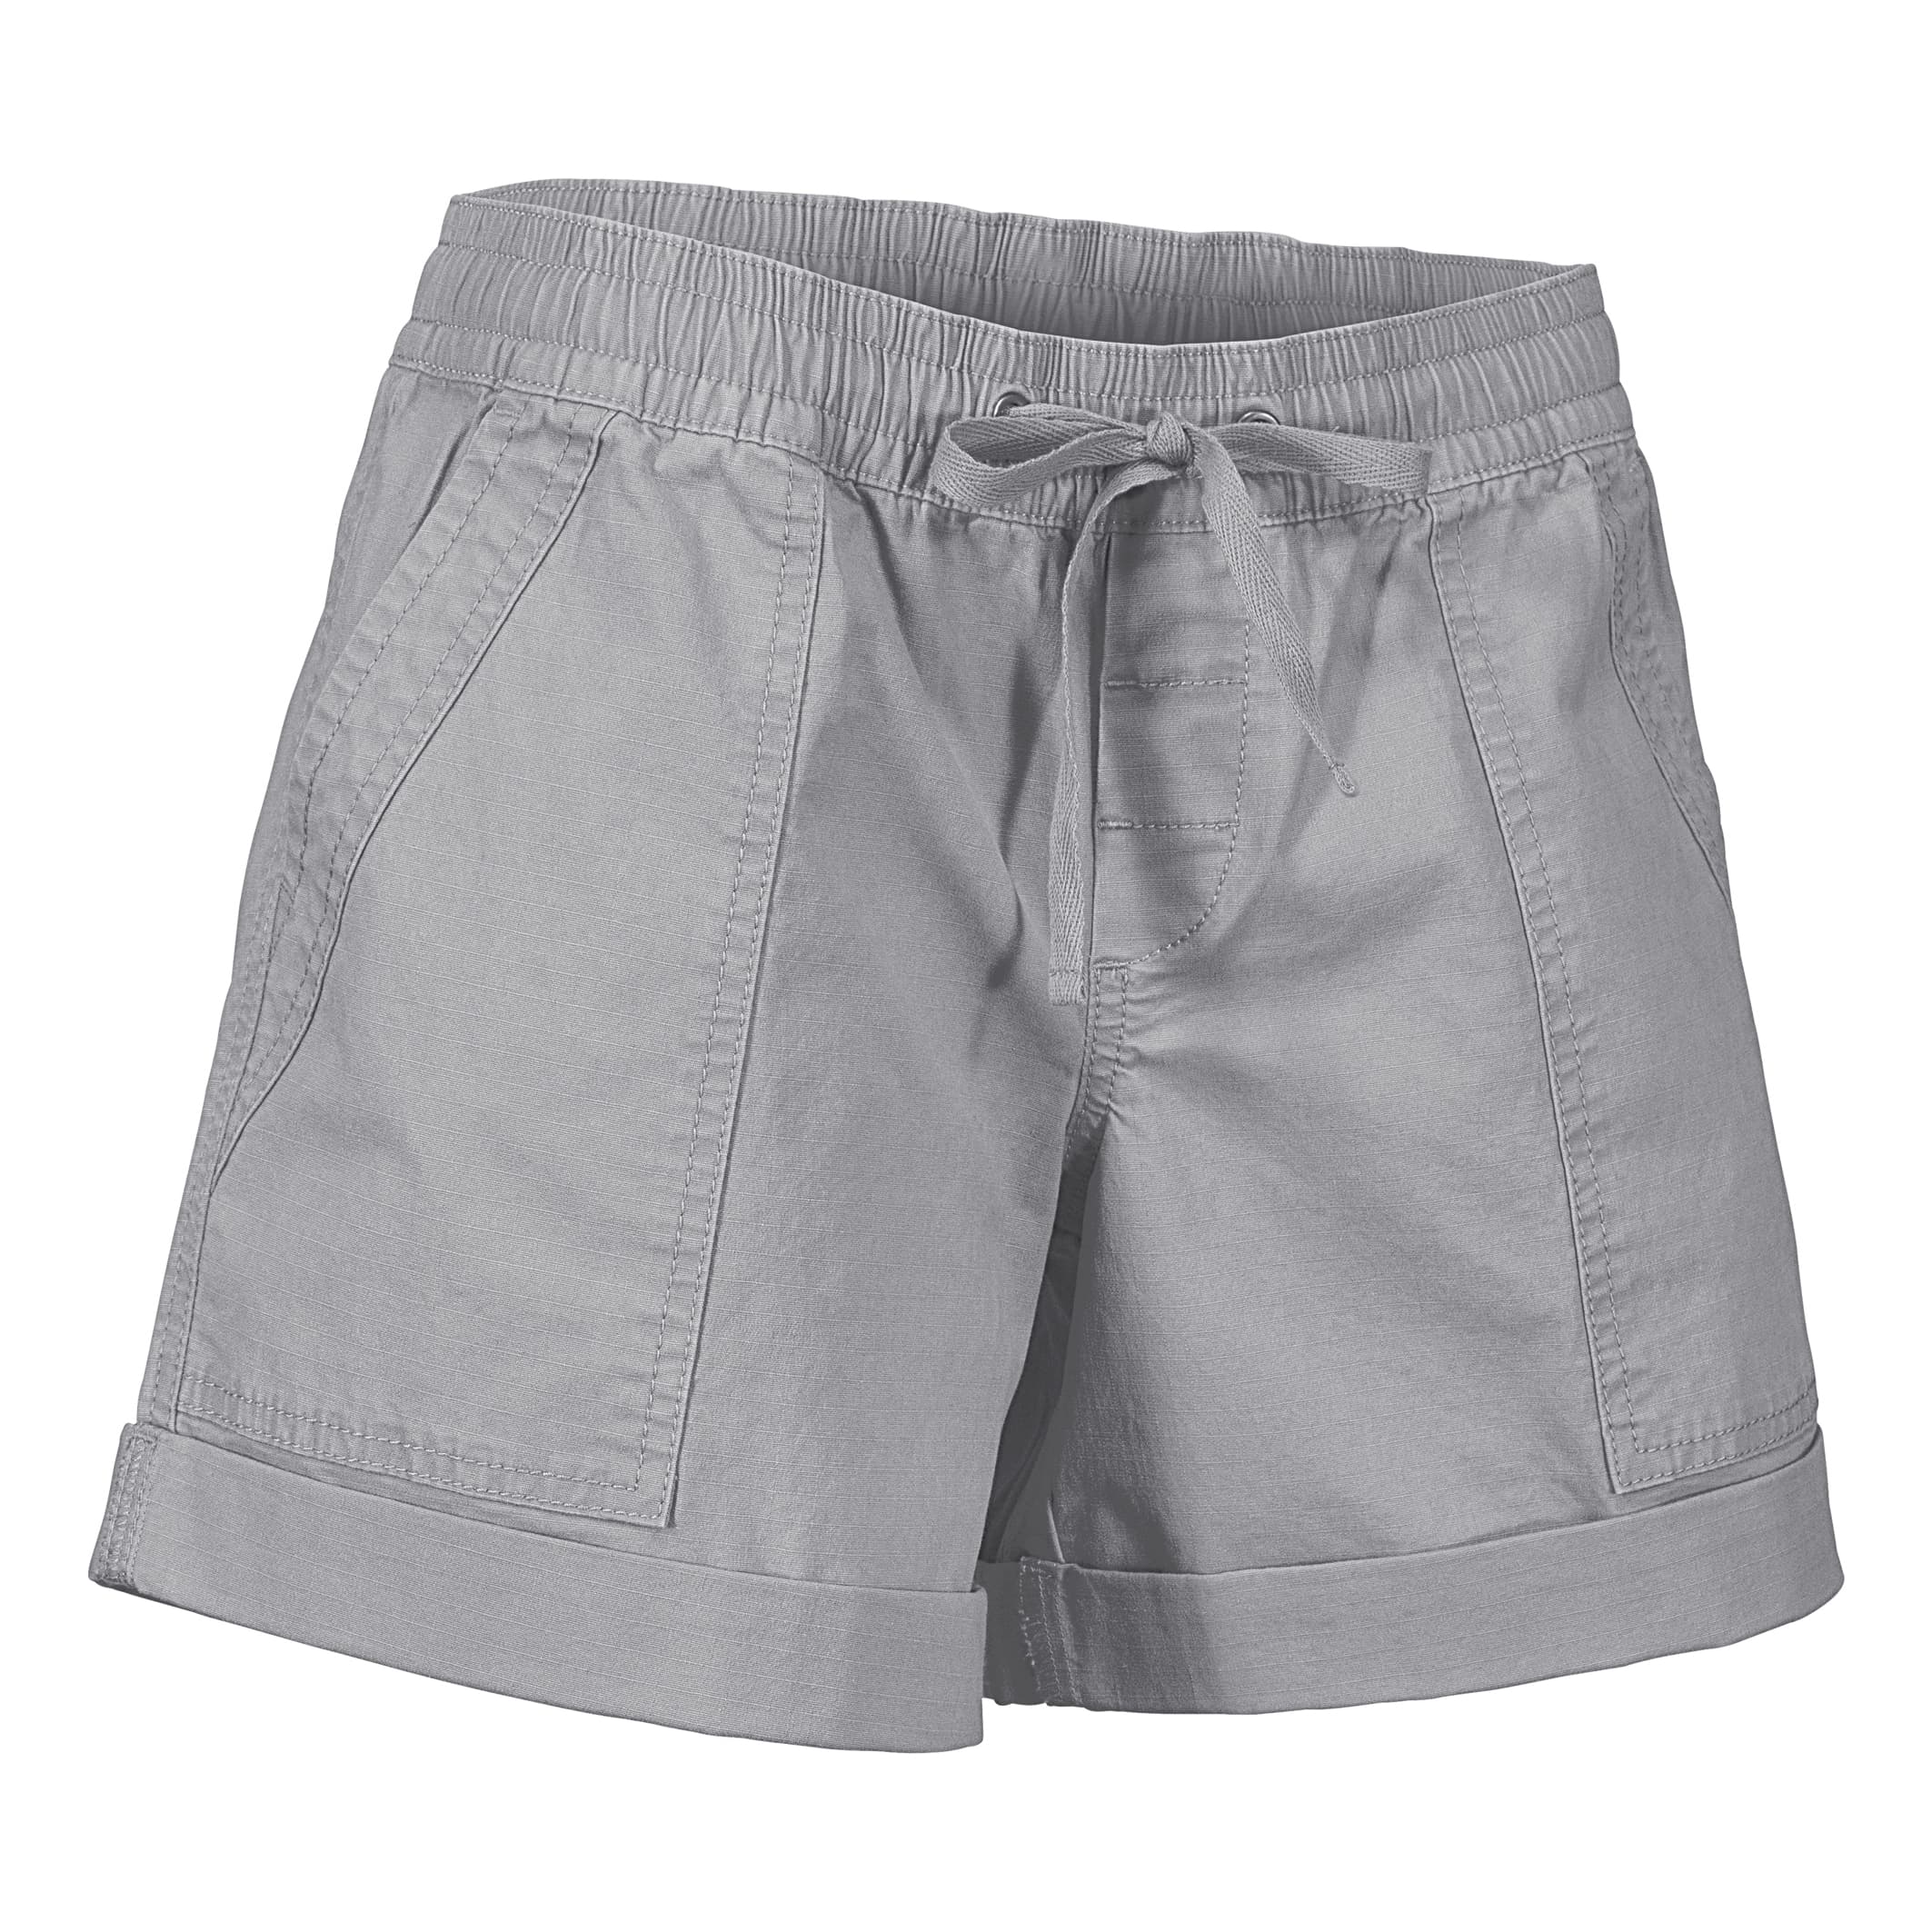 Natural Reflections® Women’s Adventurer Ripstop Shorts - Frost Grey